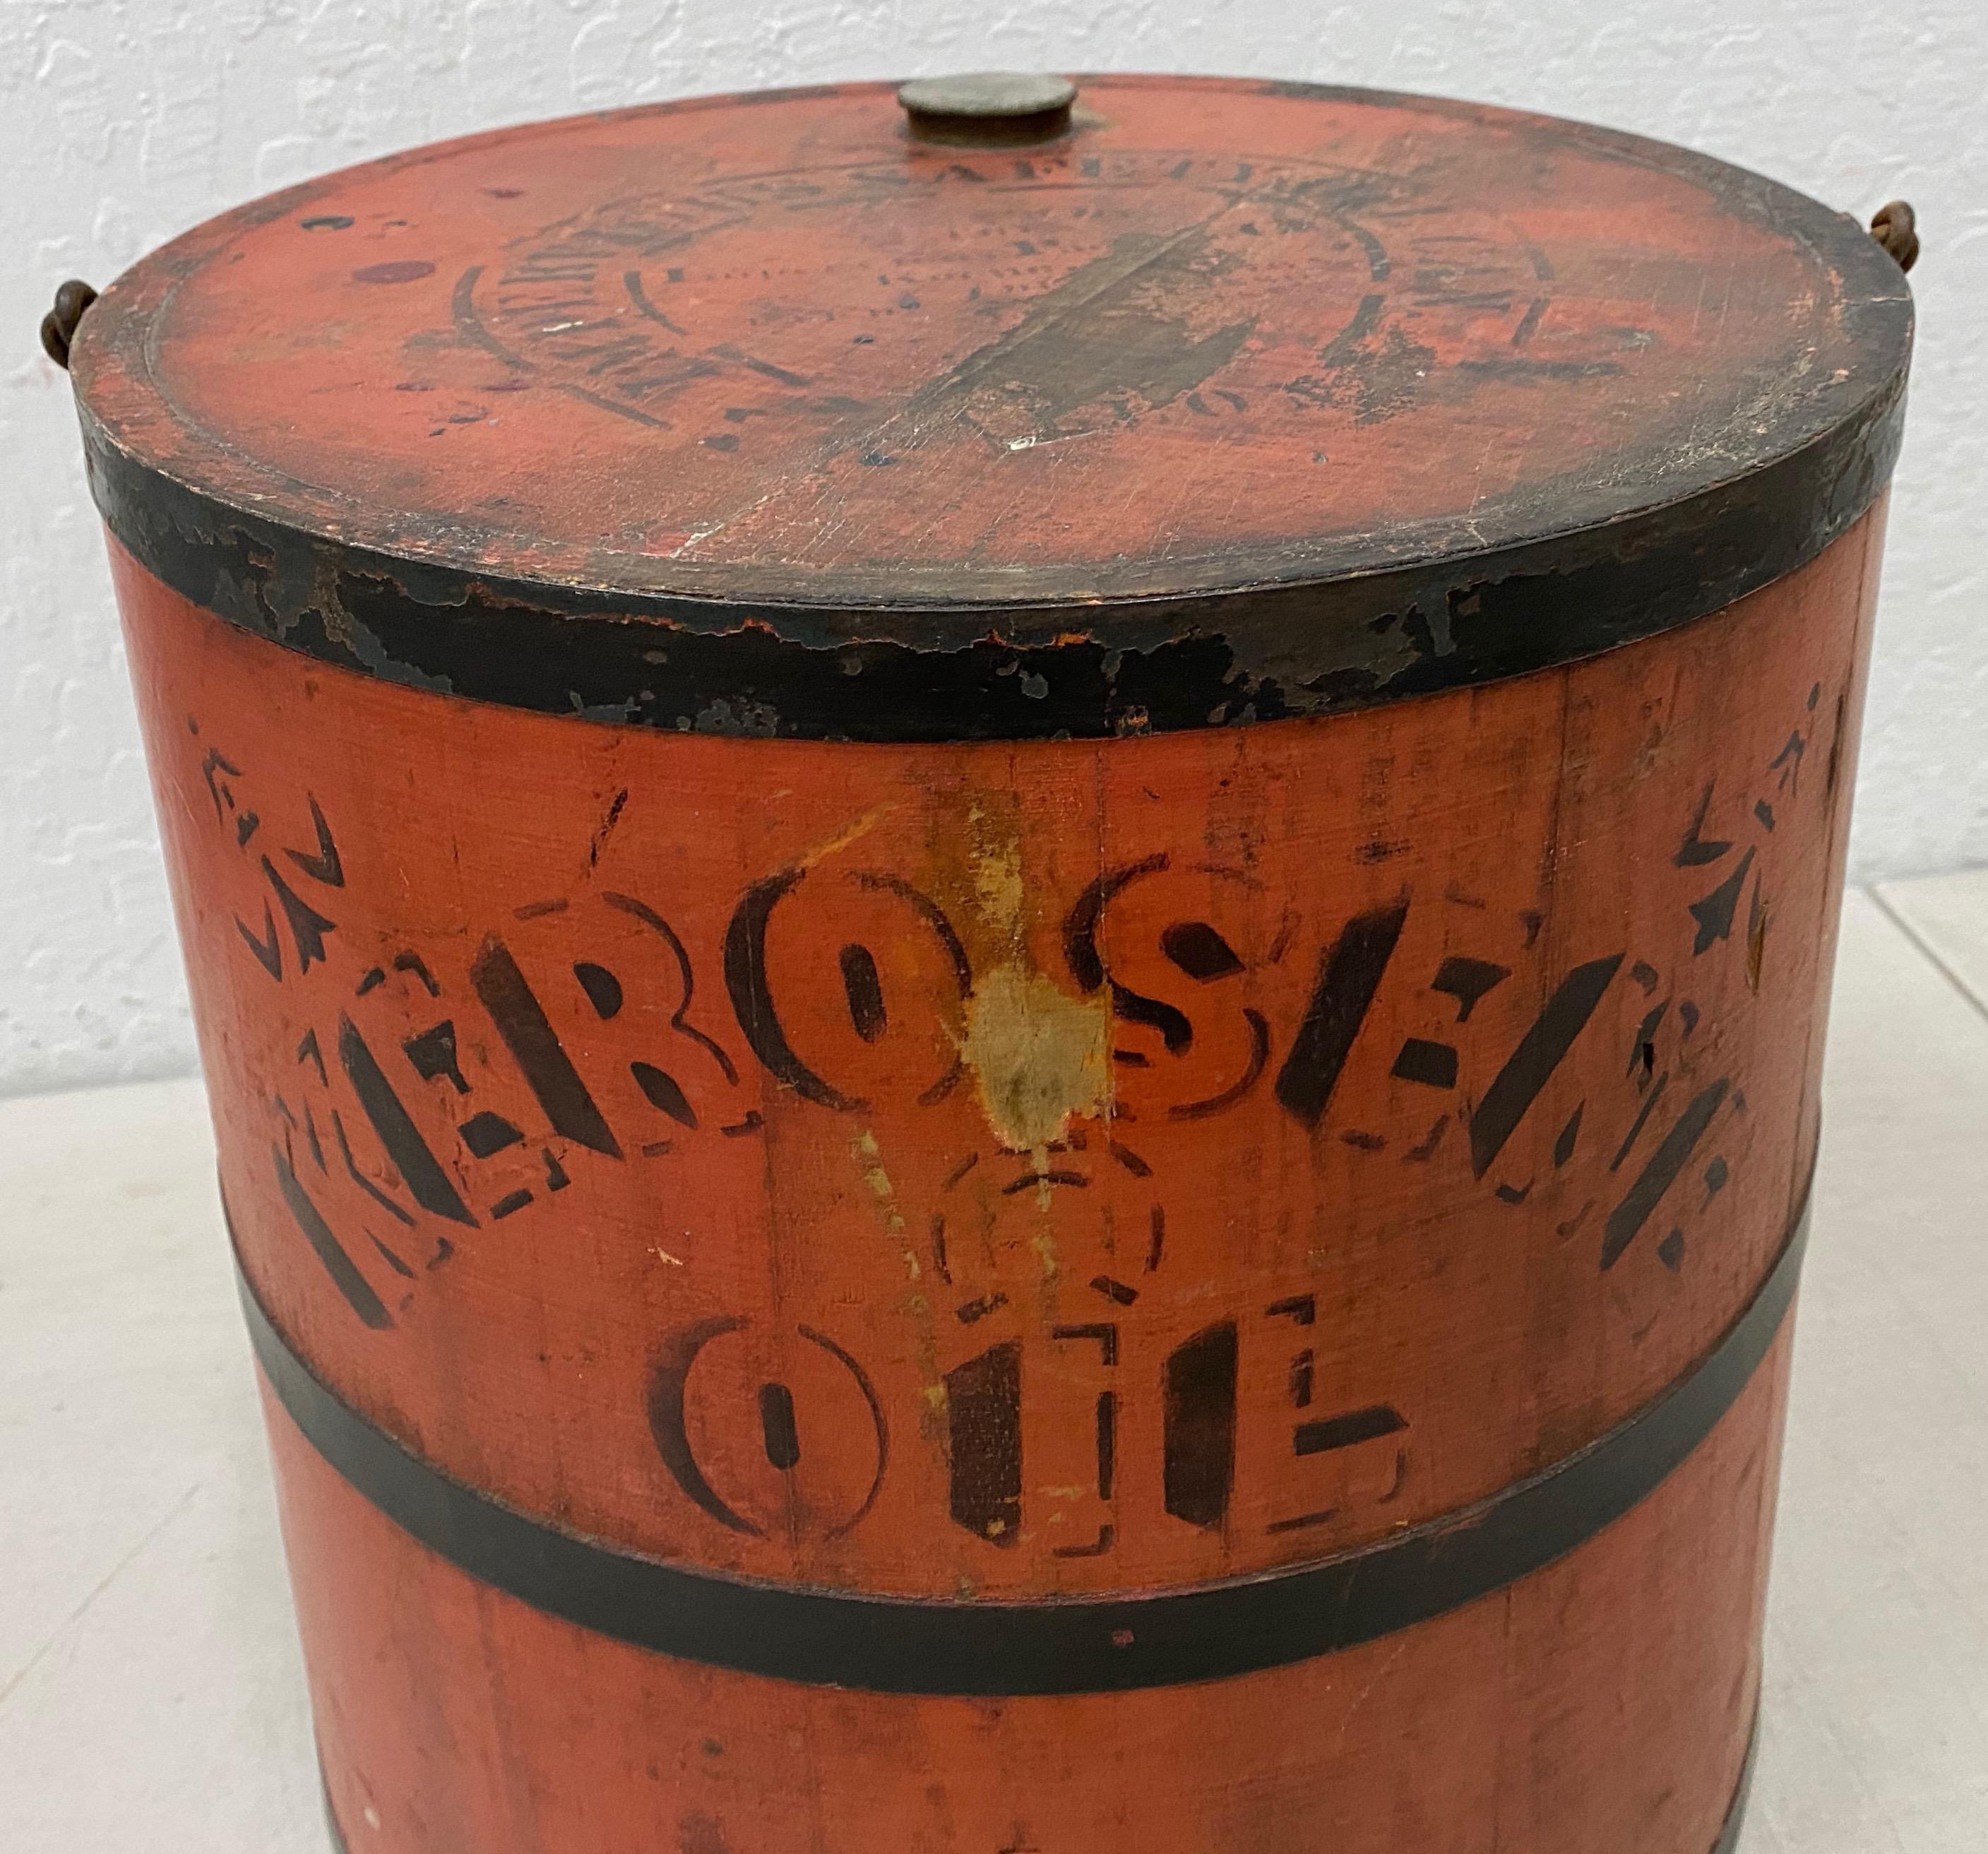 Early 20th century red stenciled kerosene oil can

Fantastic old school wooden and metal strap hand made kerosene oil can.

Though we don't use the cans today, kerosene lamps were in most every household in America in the 19th and early 20th